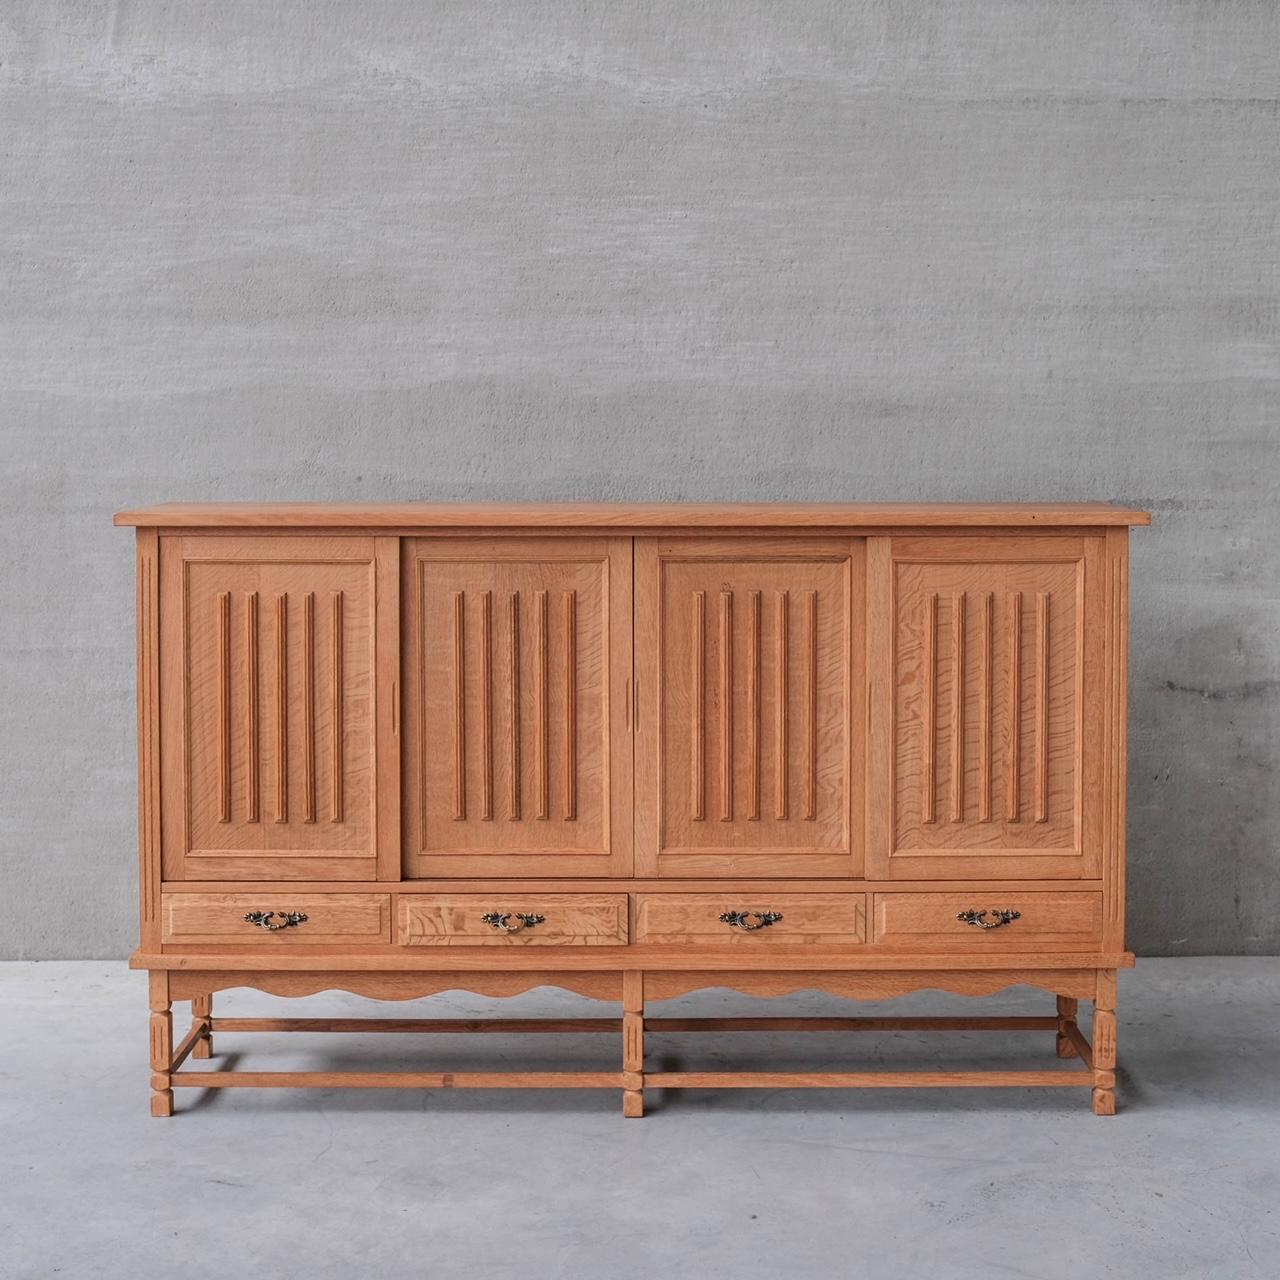 
A slight oak slatted door cabinet or sideboard in the manner of Henning Kjaernulf. 

Denmark, c1960s. 

Four doors with shelves raised over four doors. 

Good vintage condition. 

Location: Belgium Gallery. 

Dimensions: 120 H x 200 W x 45 D in cm.